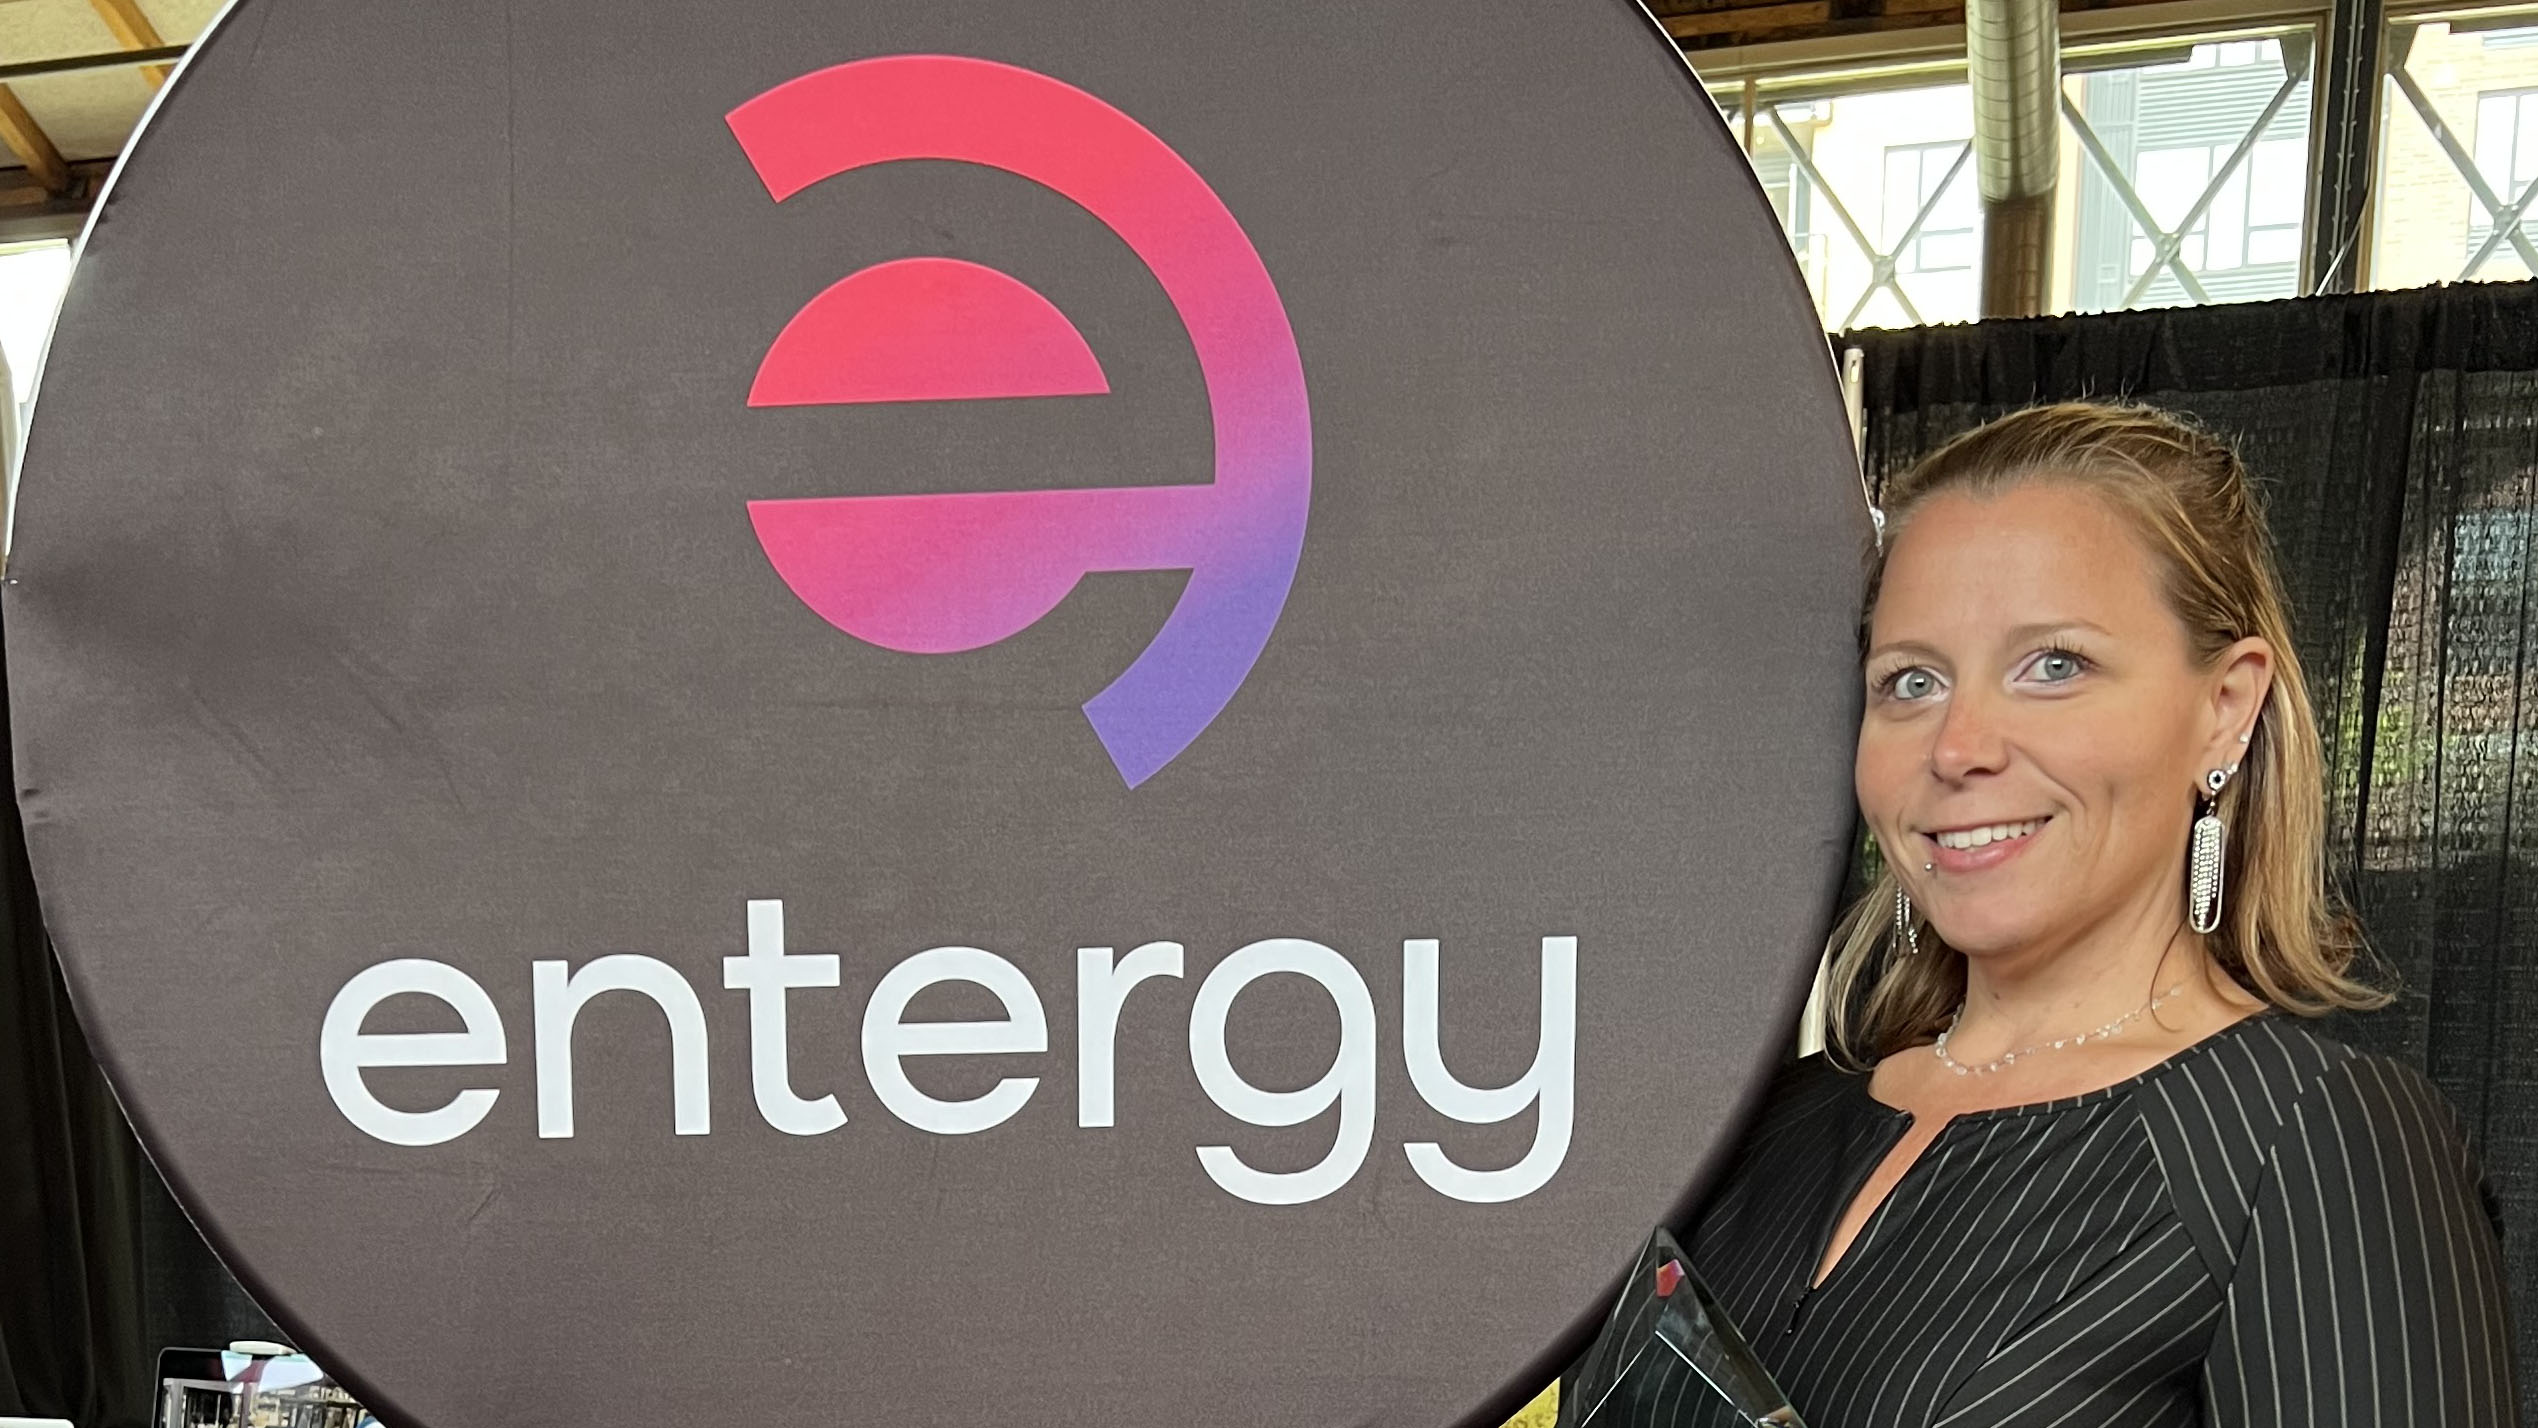 Ashleigh Lyons, an Entergy Nuclear project controls specialist